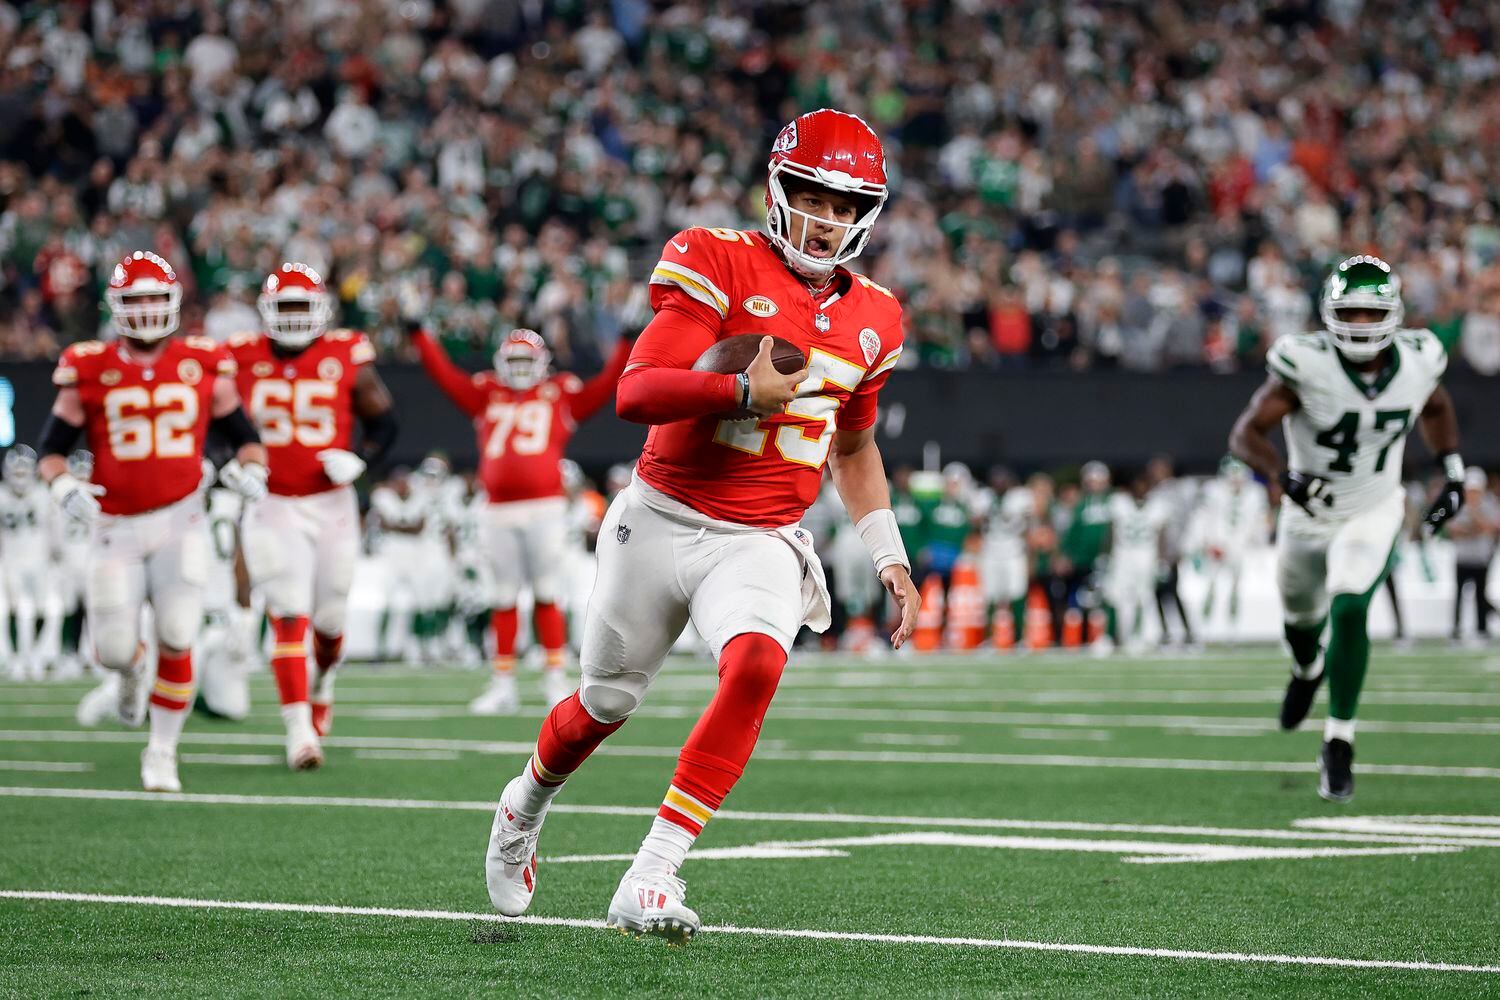 Patrick Mahomes, Kansas City withstand rally by Zach Wilson, Jets to win  23-20 - The Globe and Mail